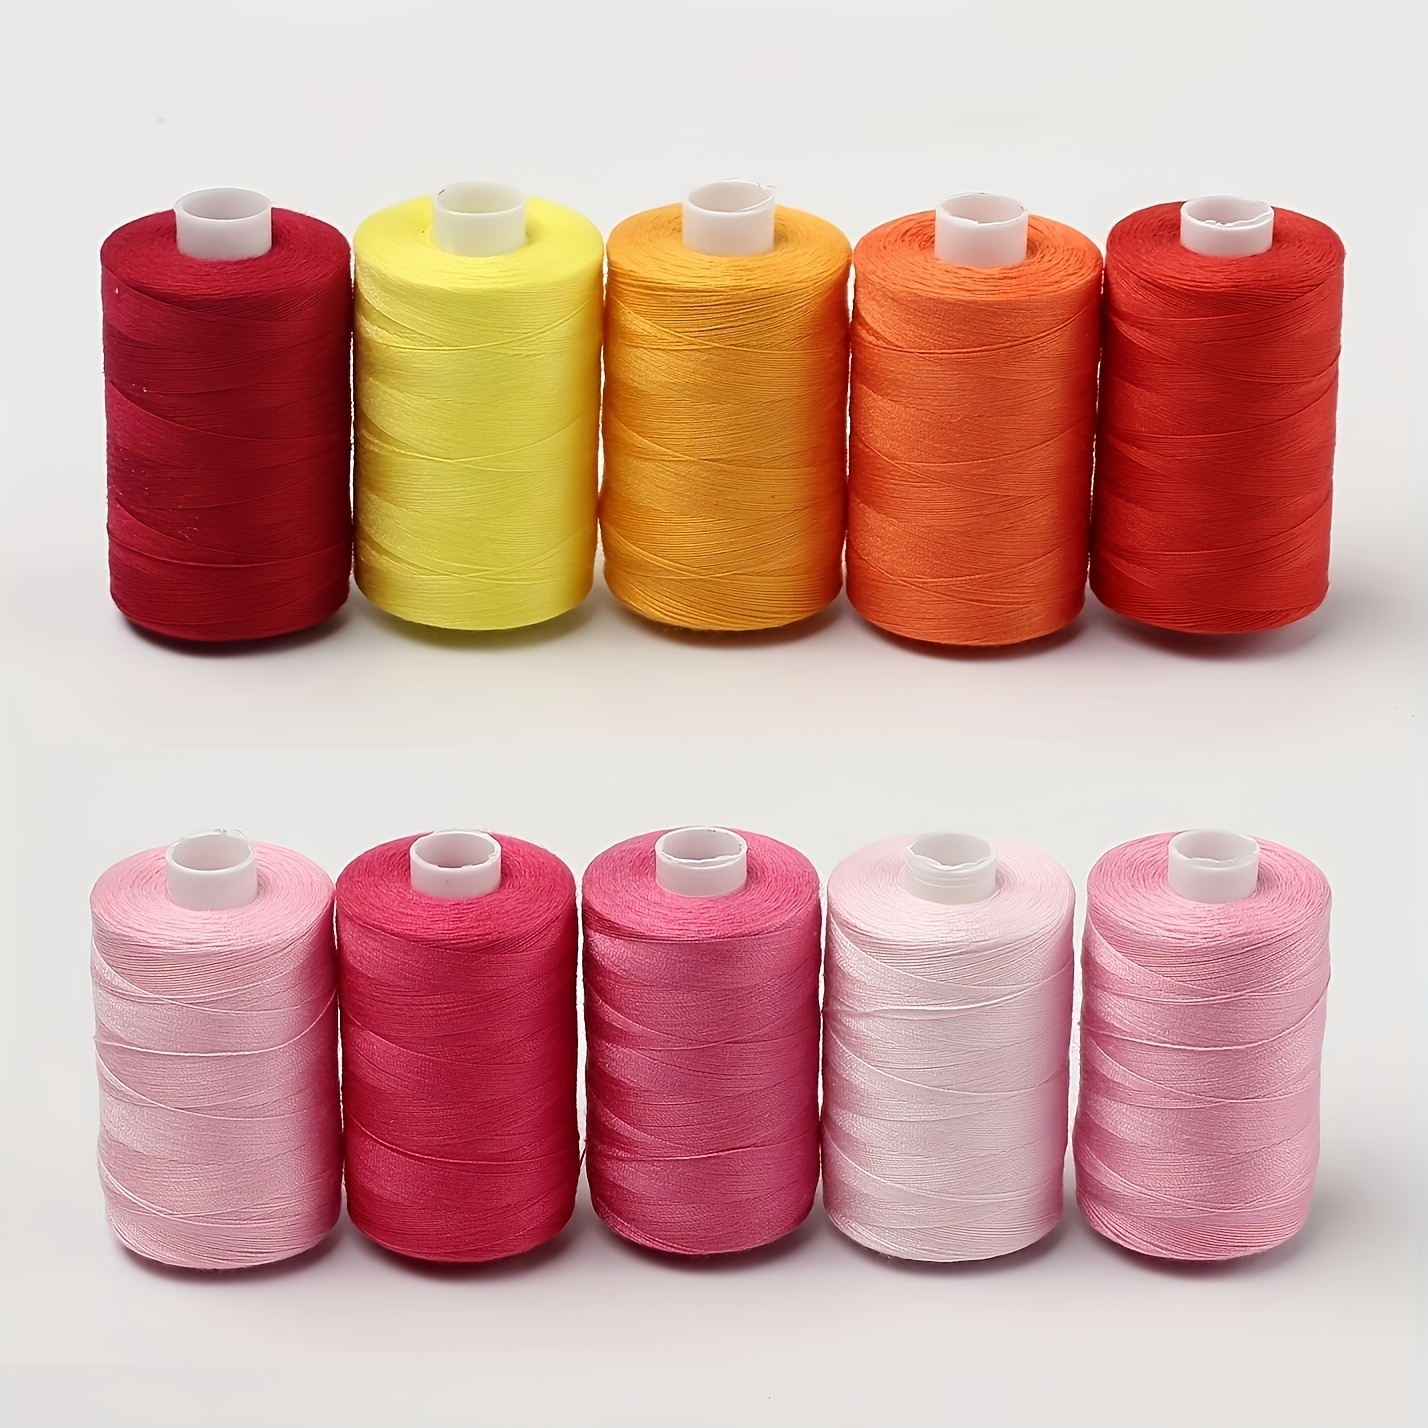 CiaraQ Sewing Threads Kits, 30 Colors Polyester 250 Yards Per Spools for  Hand Sewing & Embroidery